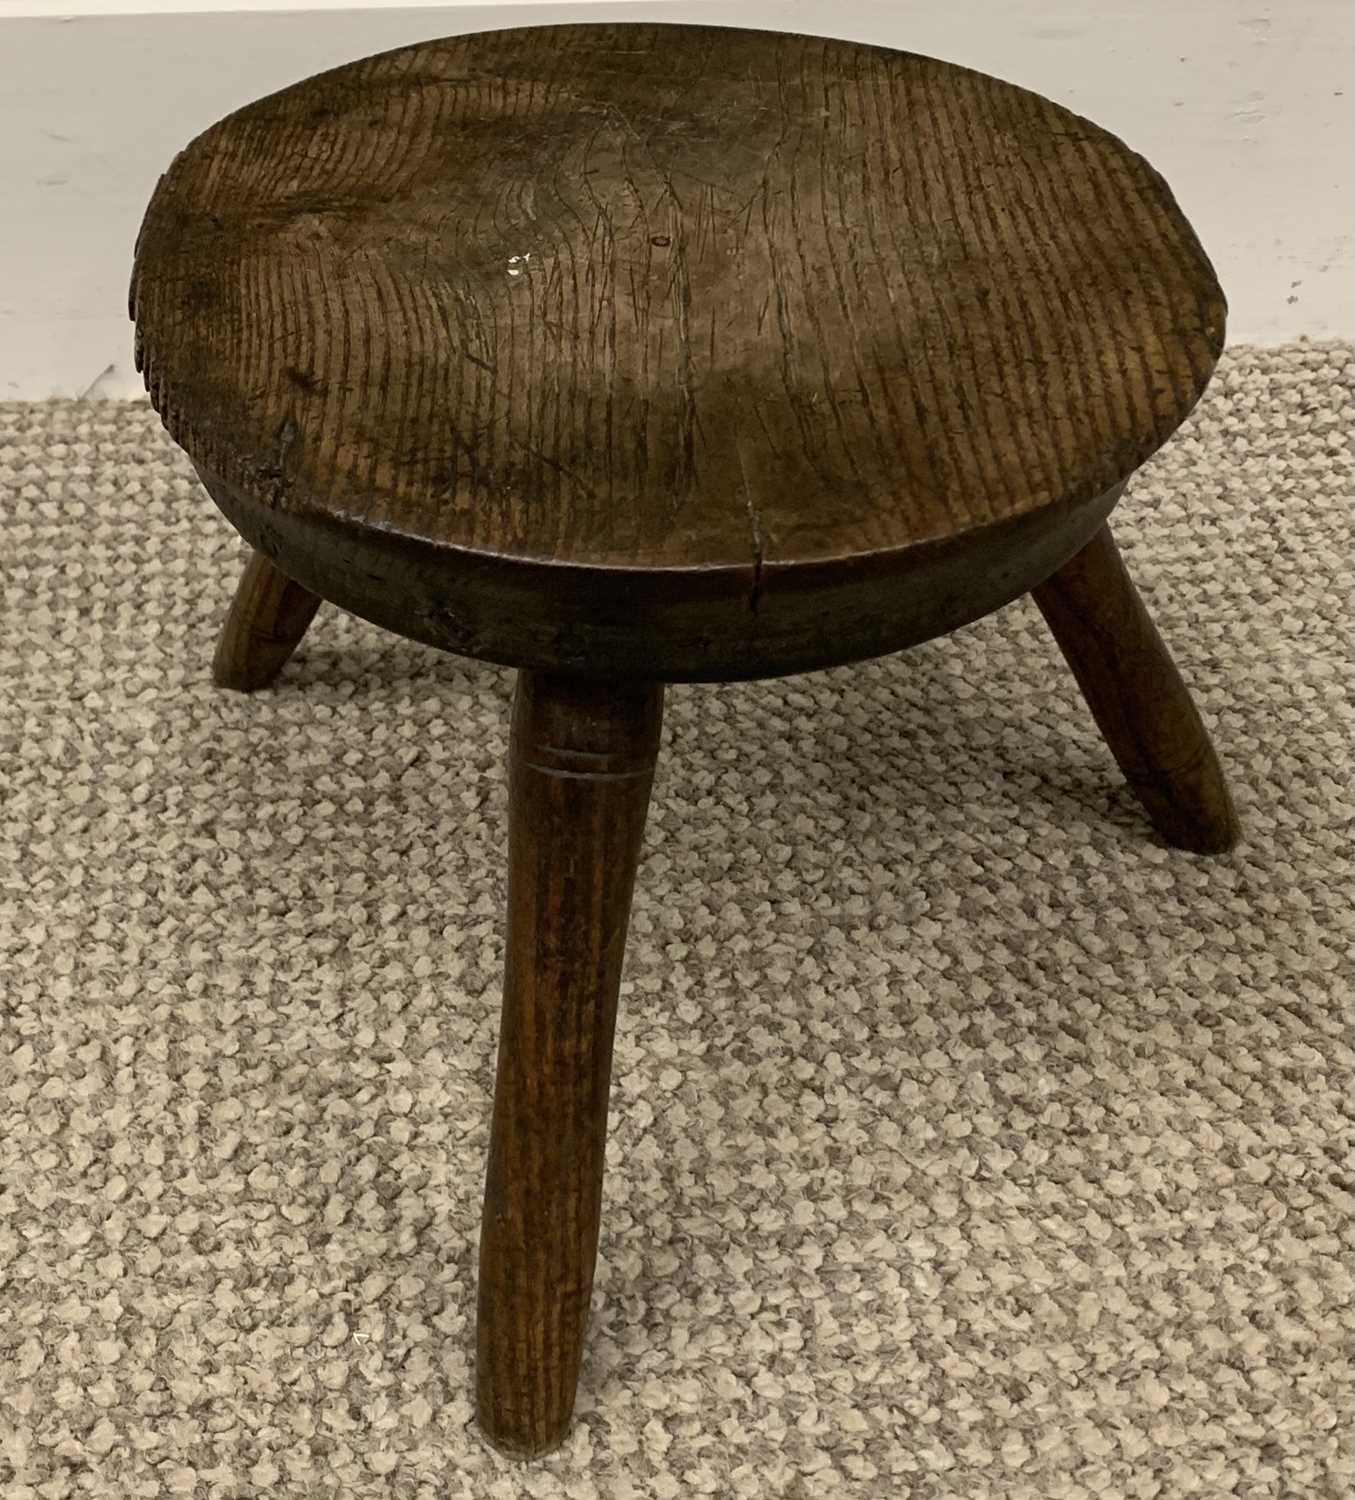 CARVED OAK SIDE TABLE with base stretcher, 65 (h) x 57 (w) x 37 (d) cms, a THREE LEGGED ELM - Image 7 of 7